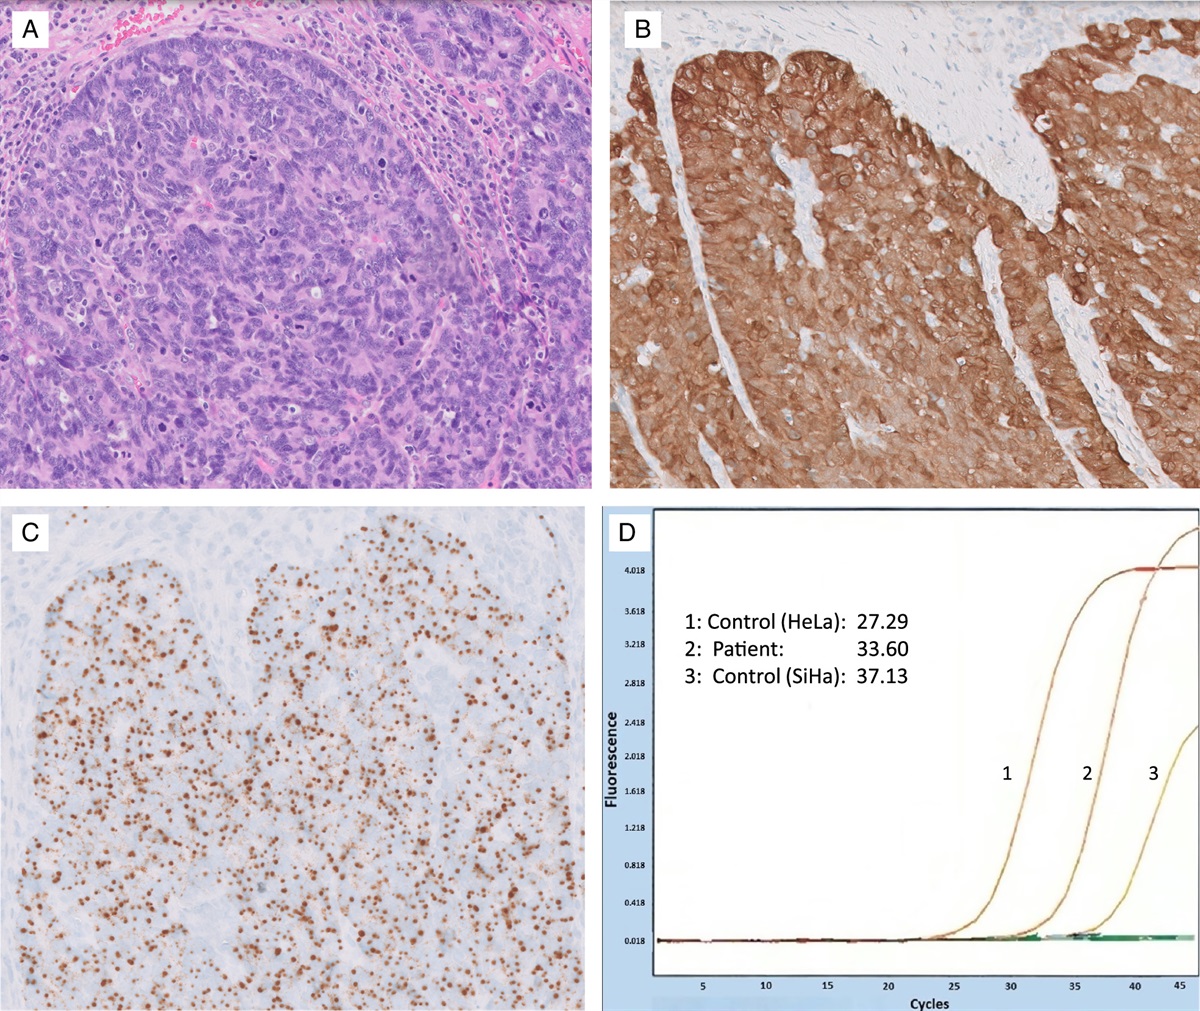 Reappraisal of p16 for Determining HPV Status of Head and Neck Carcinomas Arising in HPV Hotspots